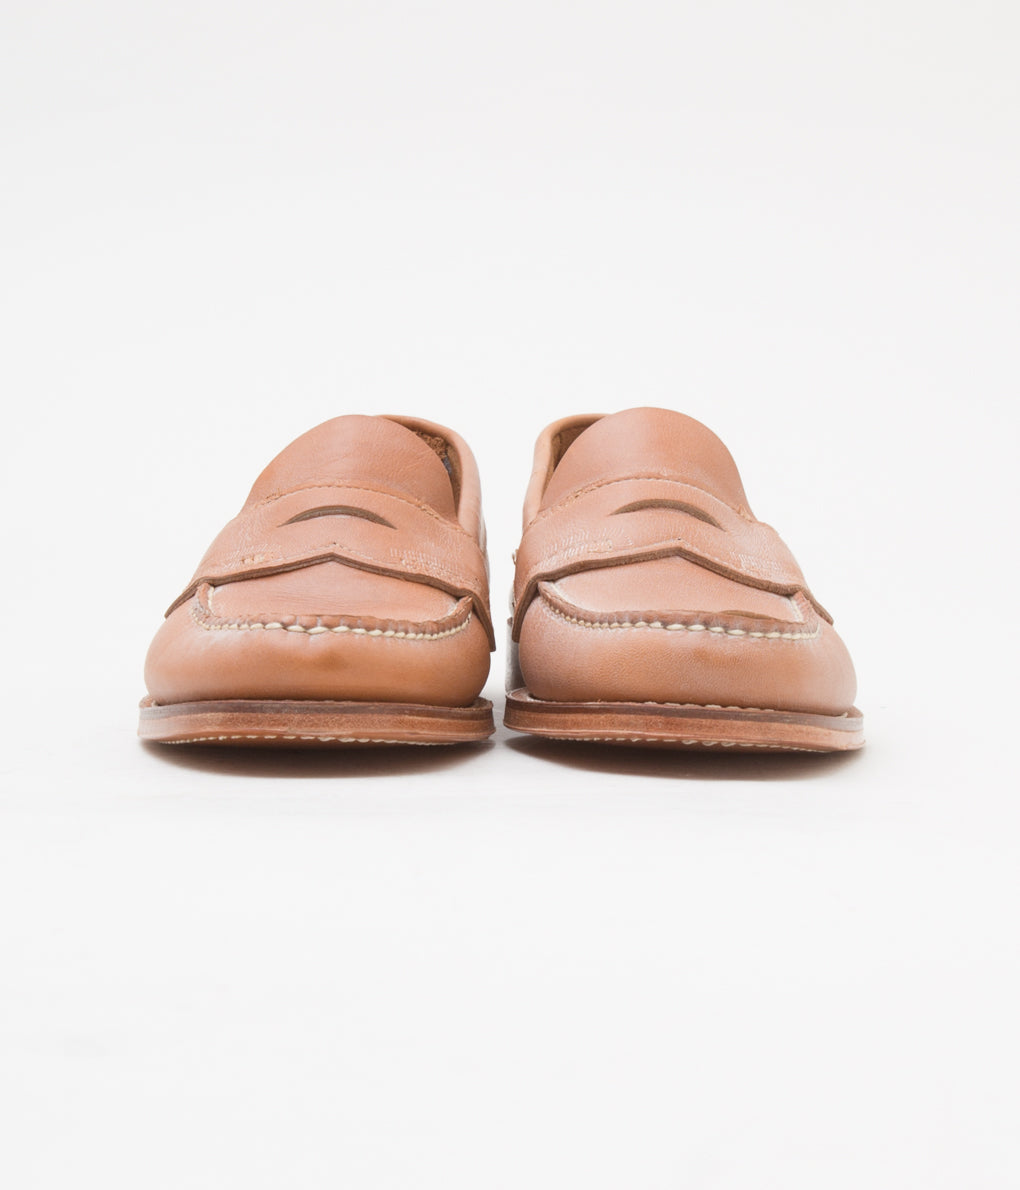 FROM USA "VINTAGE GHBASS PENNY LOAFERS"(TAN)